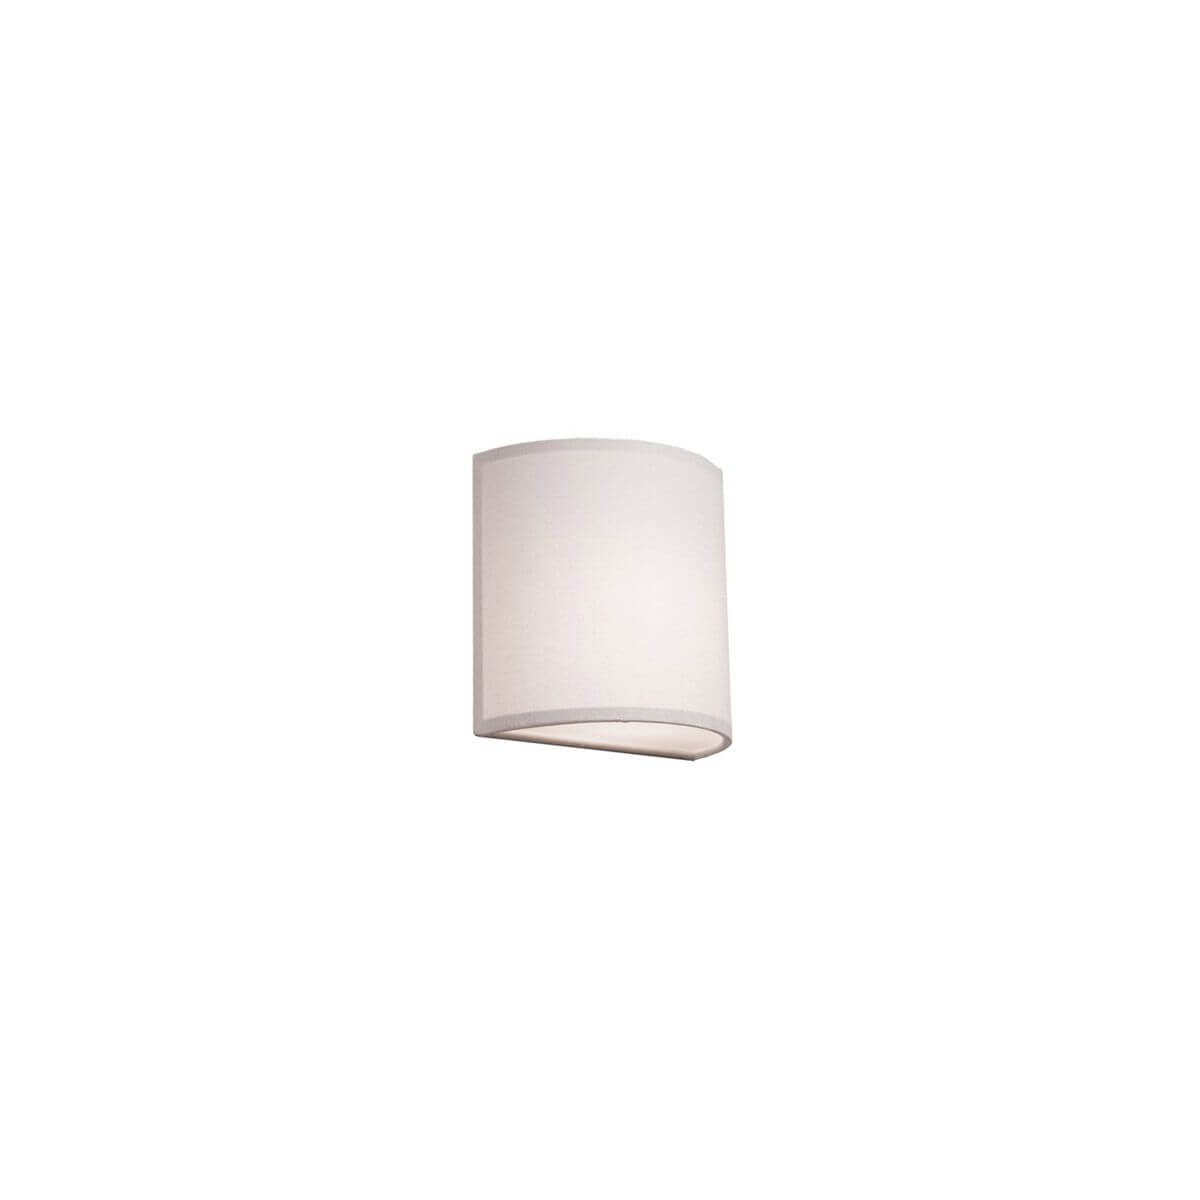 Artcraft SC526WH Mercer Street 1 Light 10 inch Tall Wall Sconce in White